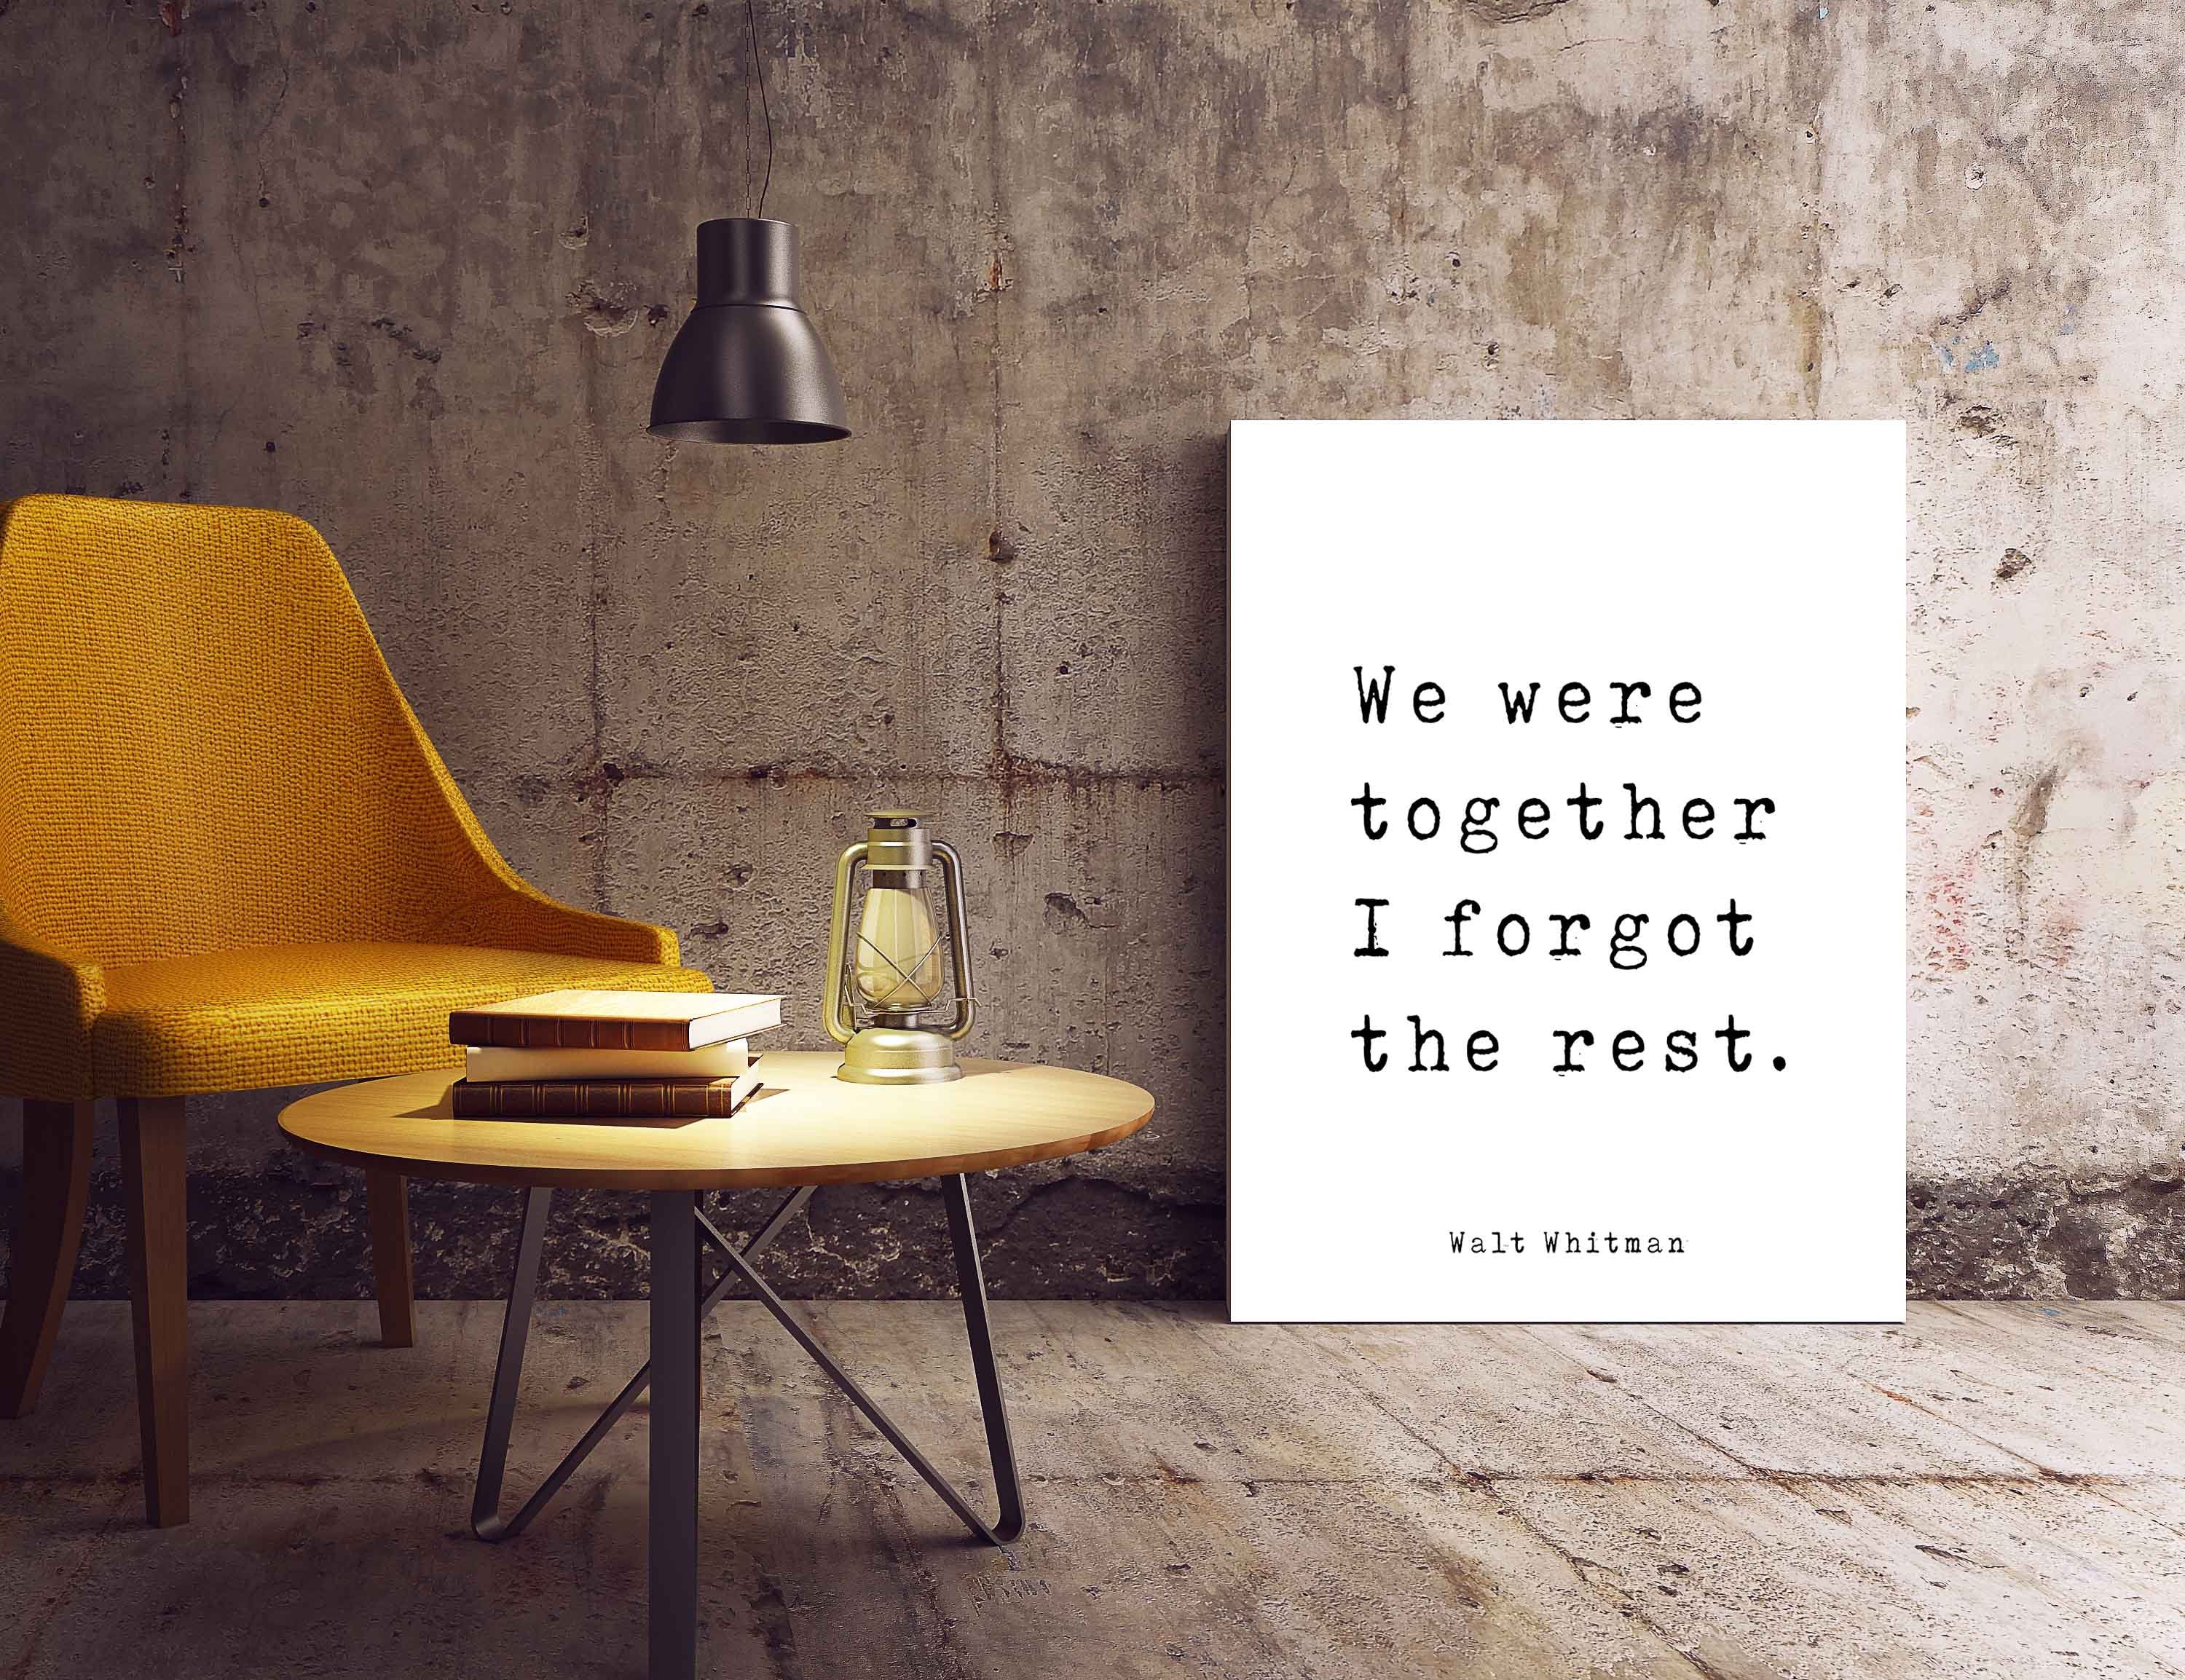 Walt Whitman Quote Print, We were together I forgot the rest, Inspirational  love Poem in Black & White for Home Wall Decor, Unframed - BookQuoteDecor